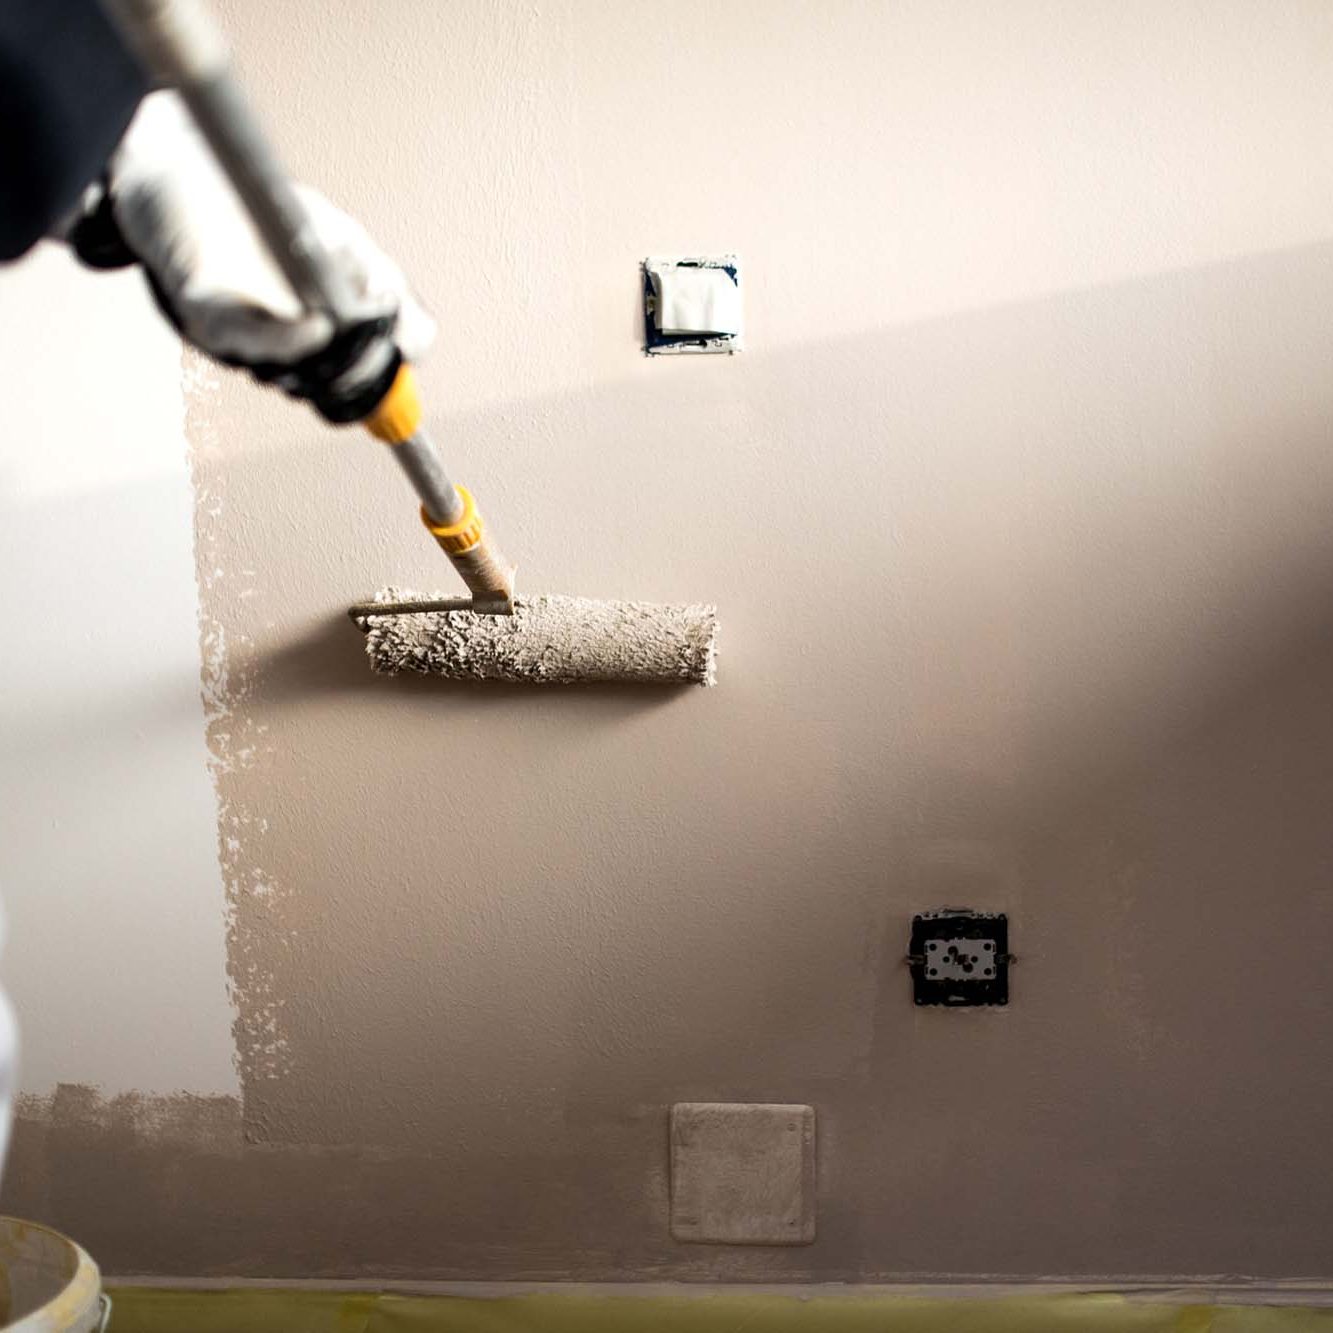 Handy man decorating walls with paint. Construction plaster worker painting and renovating with professional tools